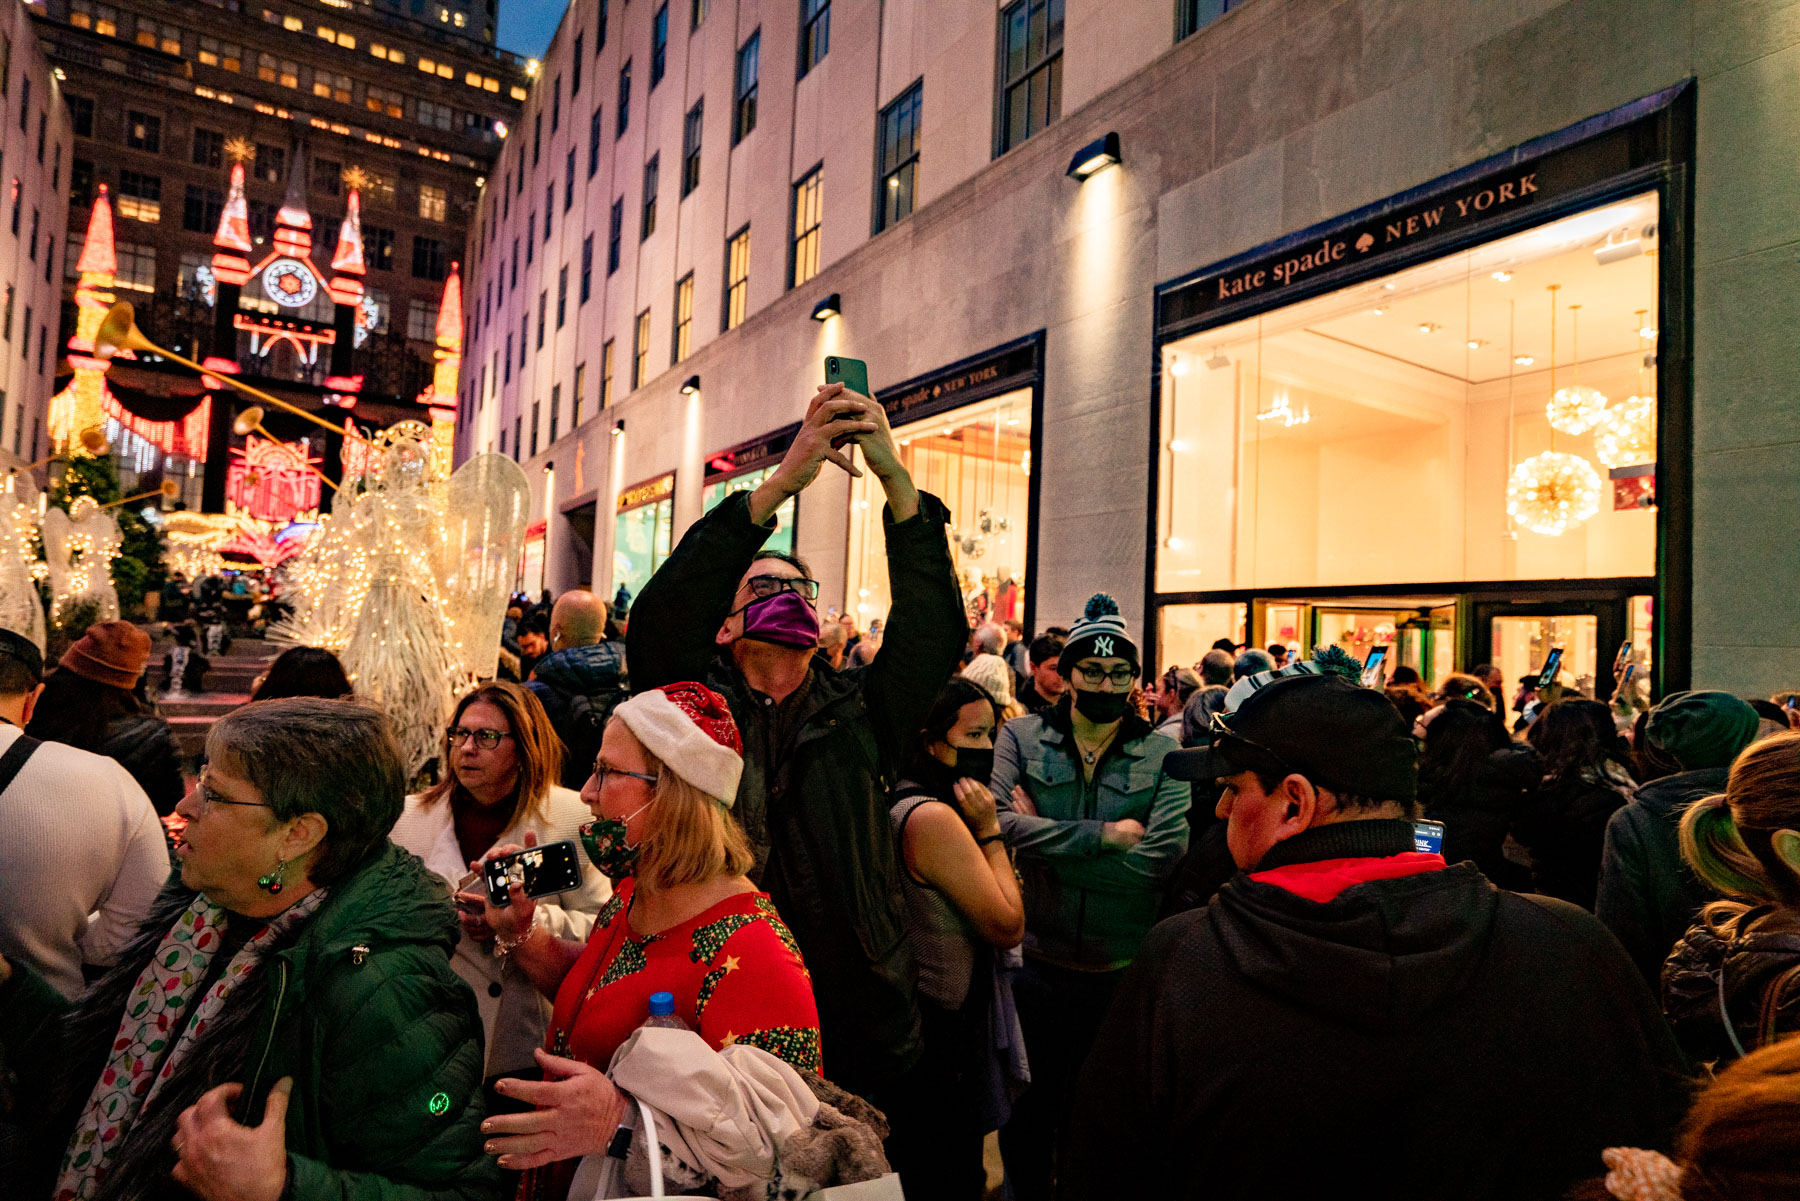 Crowds at the Rockefeller Center Christmas